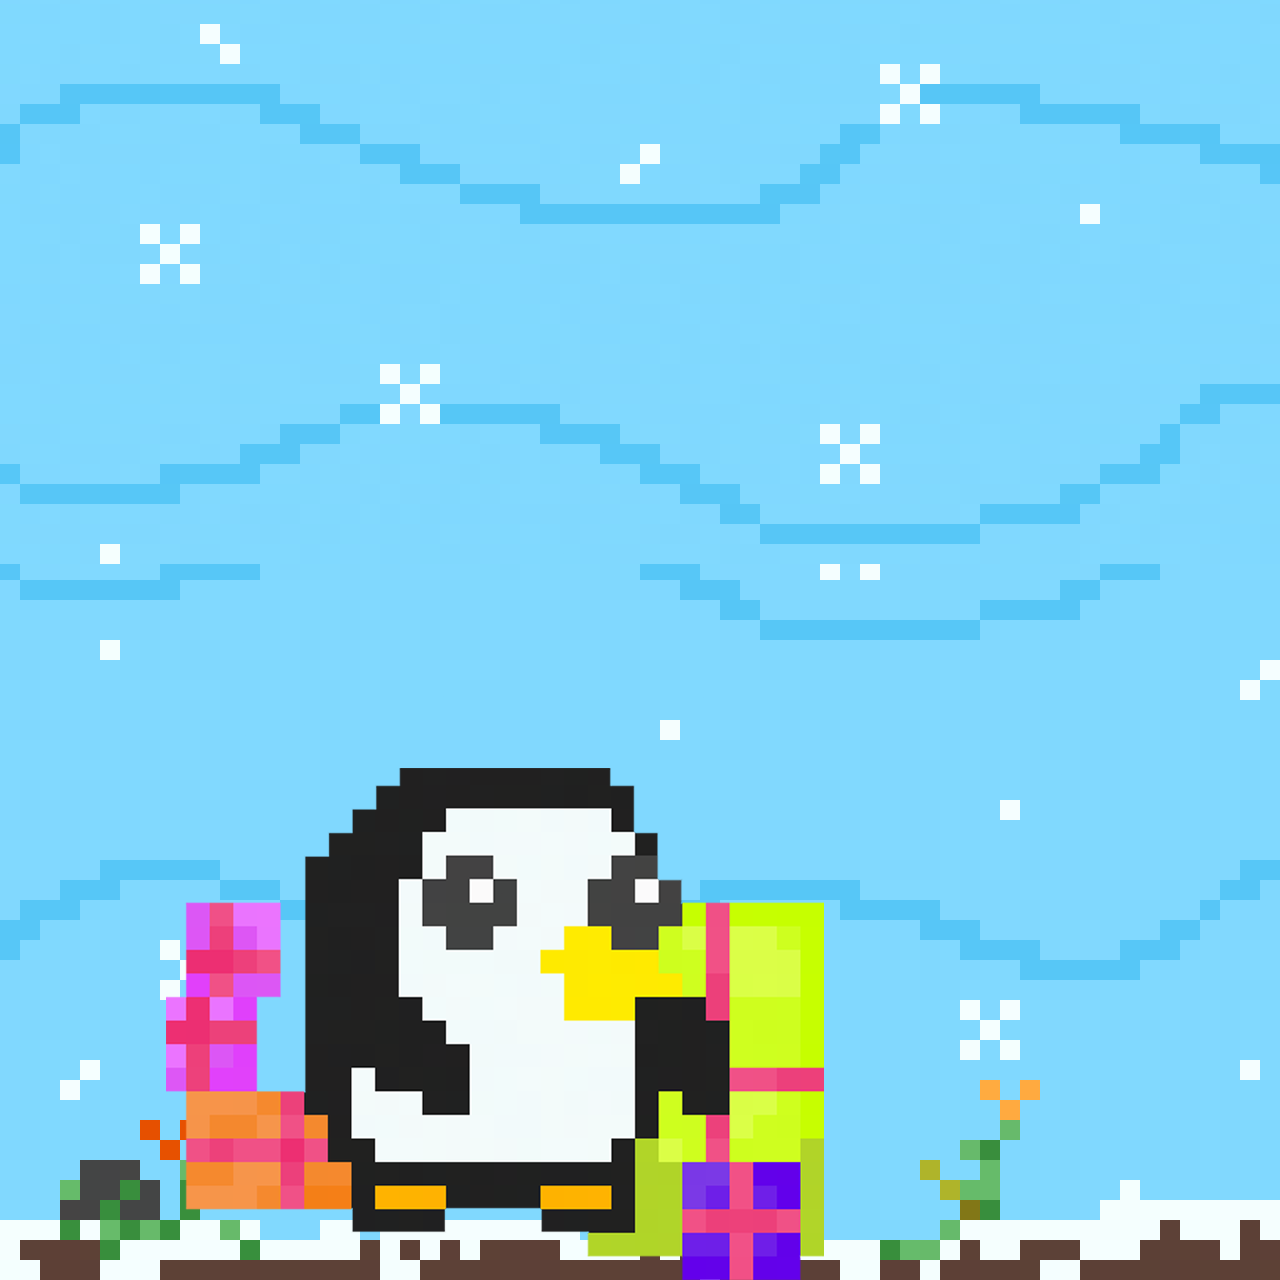 Pengyou on snowy land